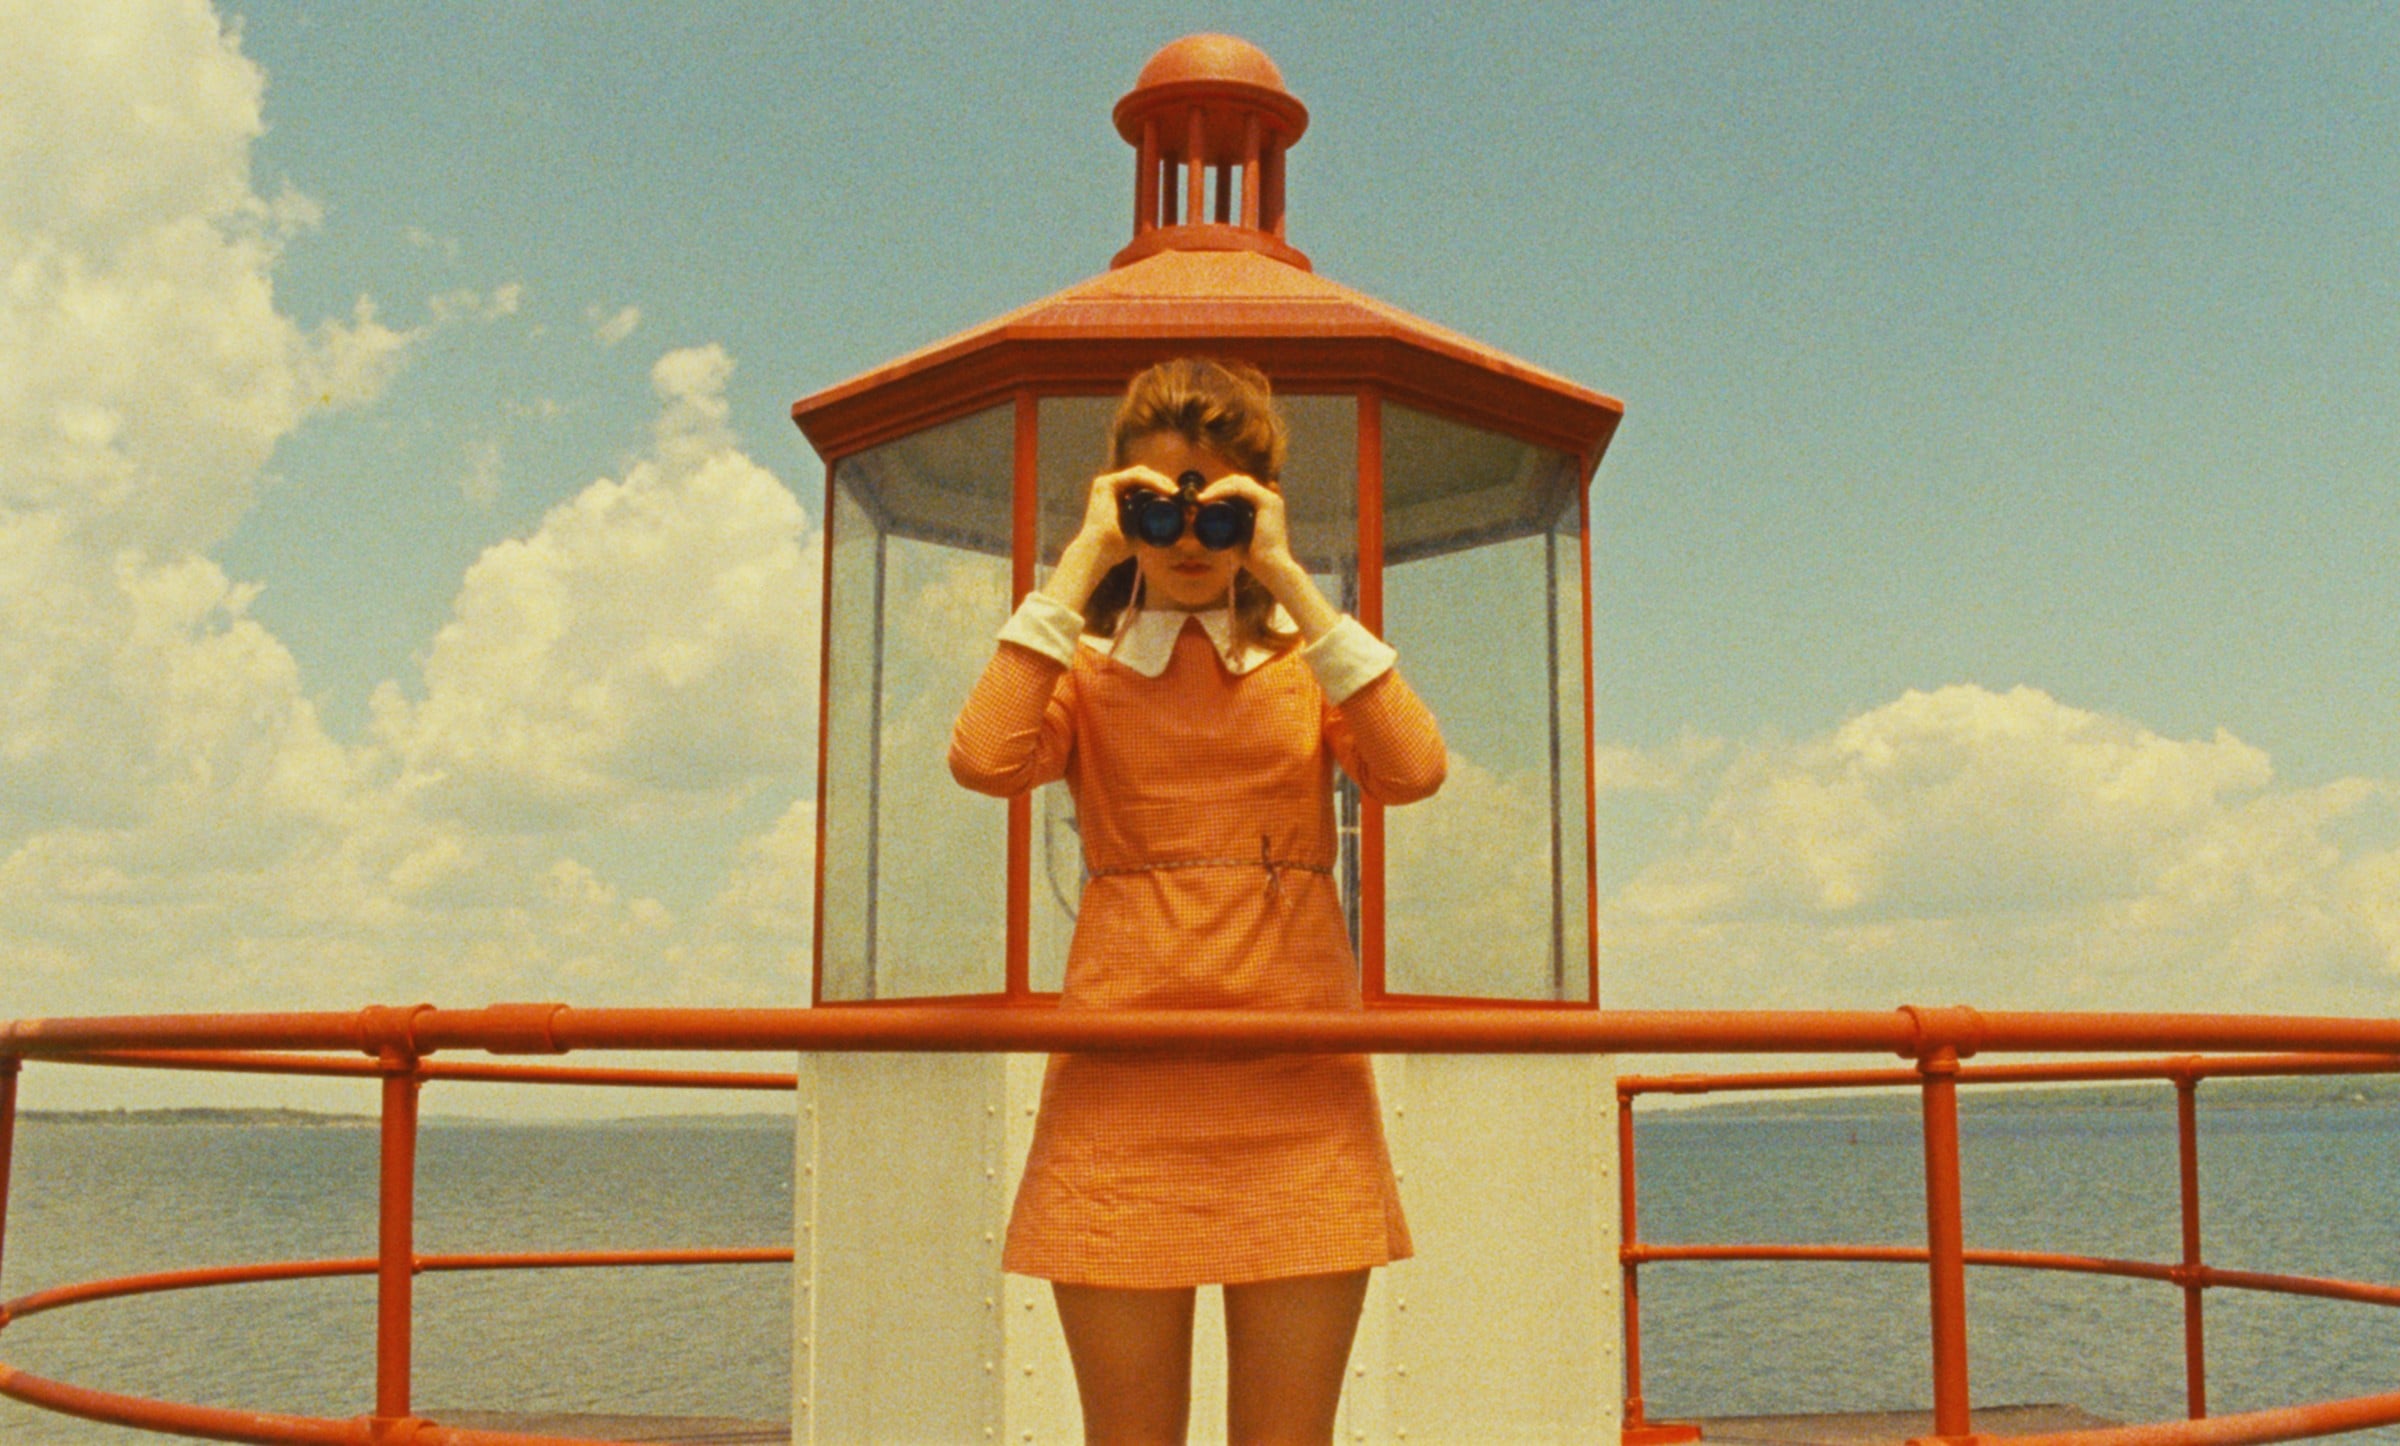 20 Things Every Wes Anderson Fan Needs